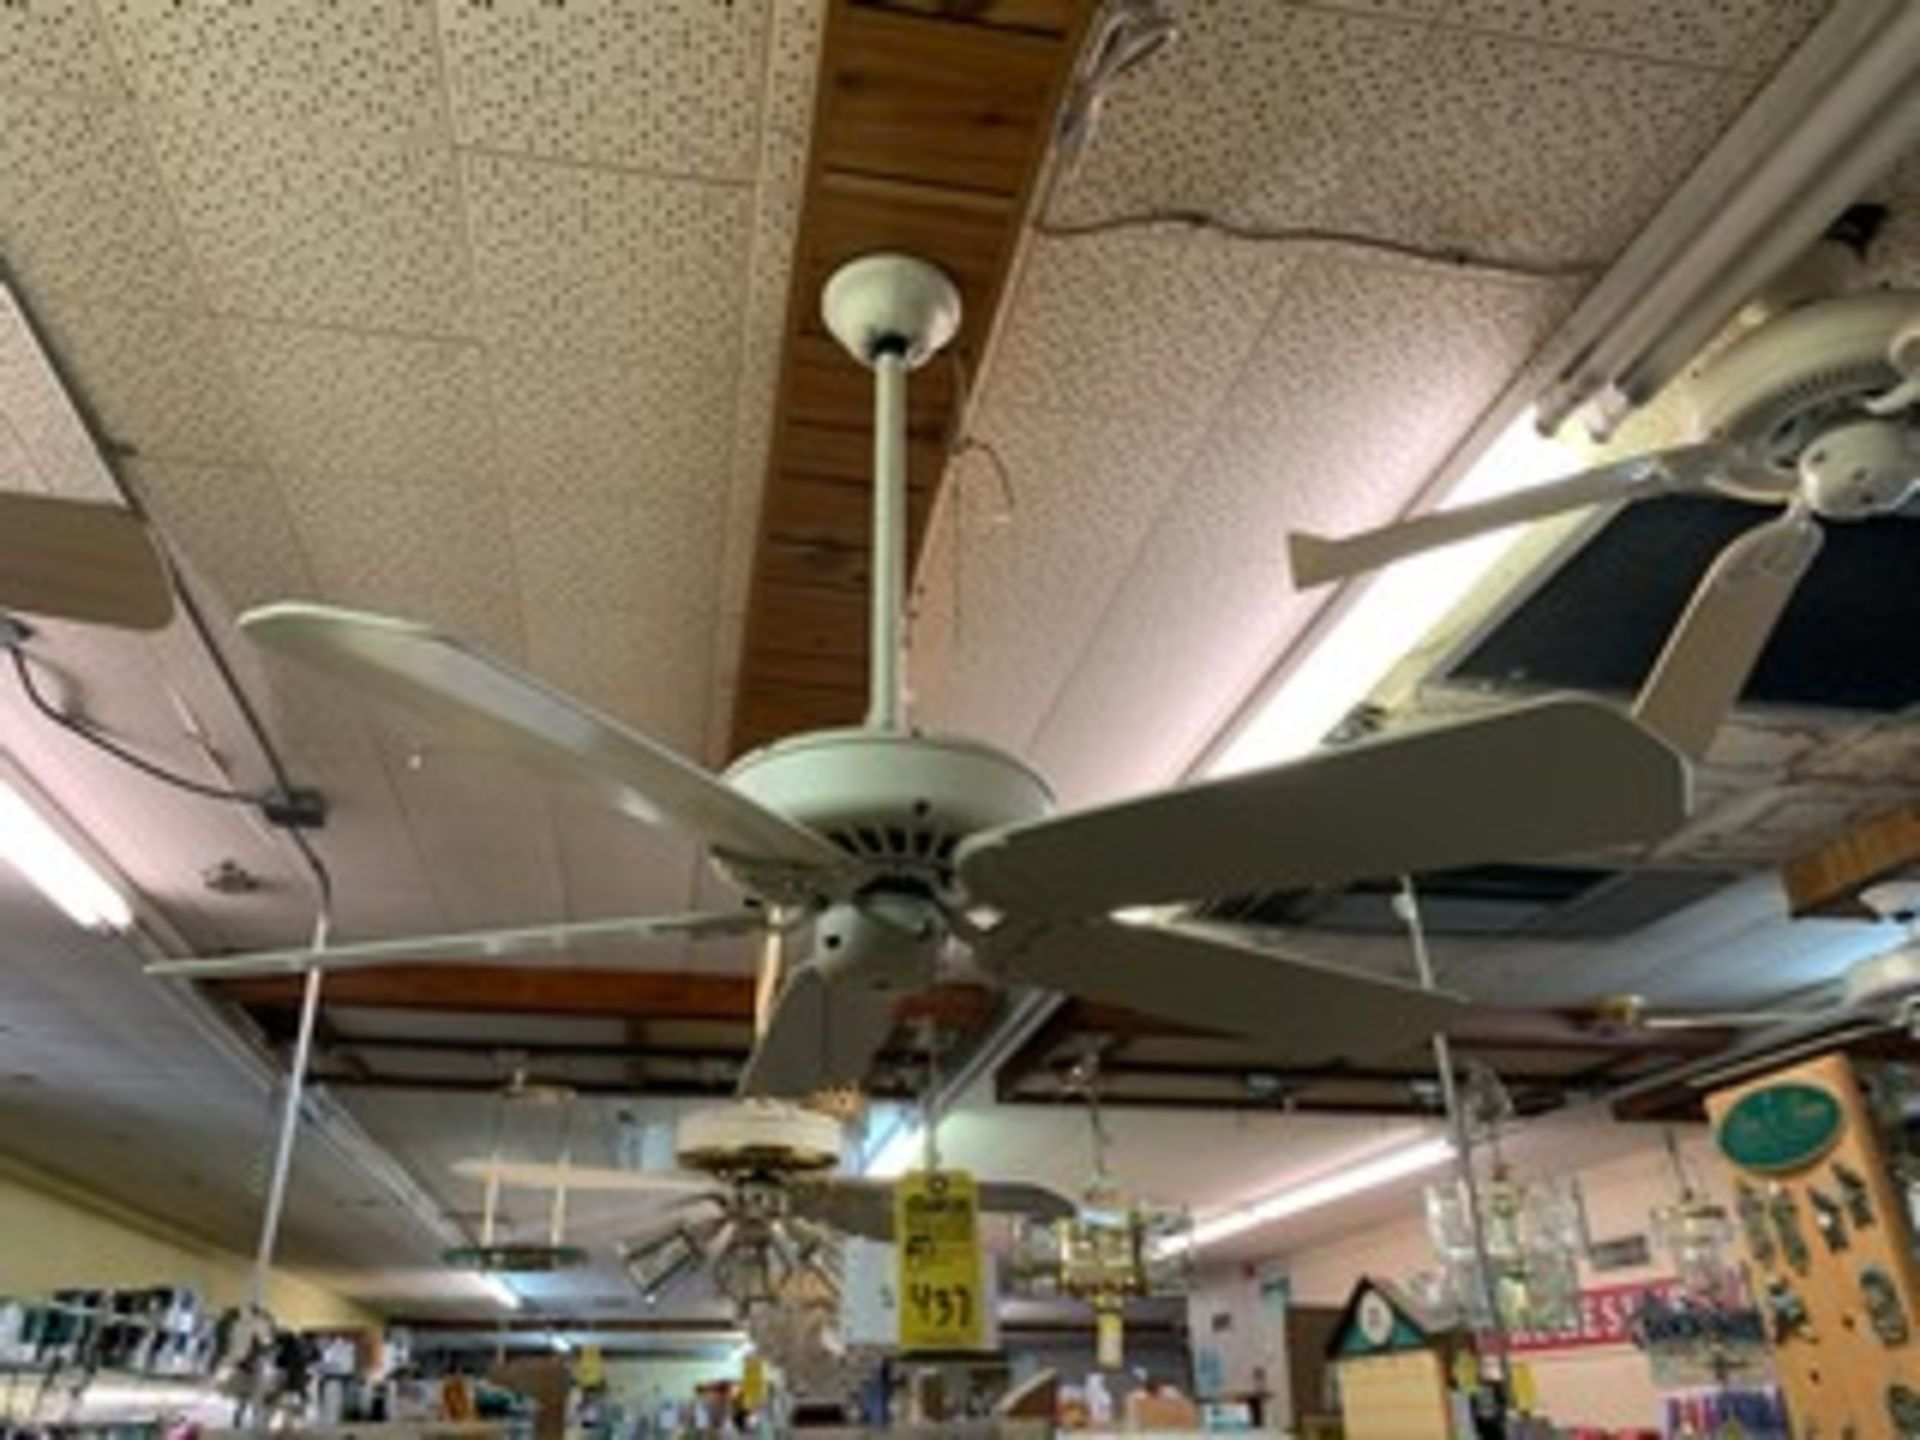 ASSORTED CEILING FANS - WHITE / OFF-WHITE